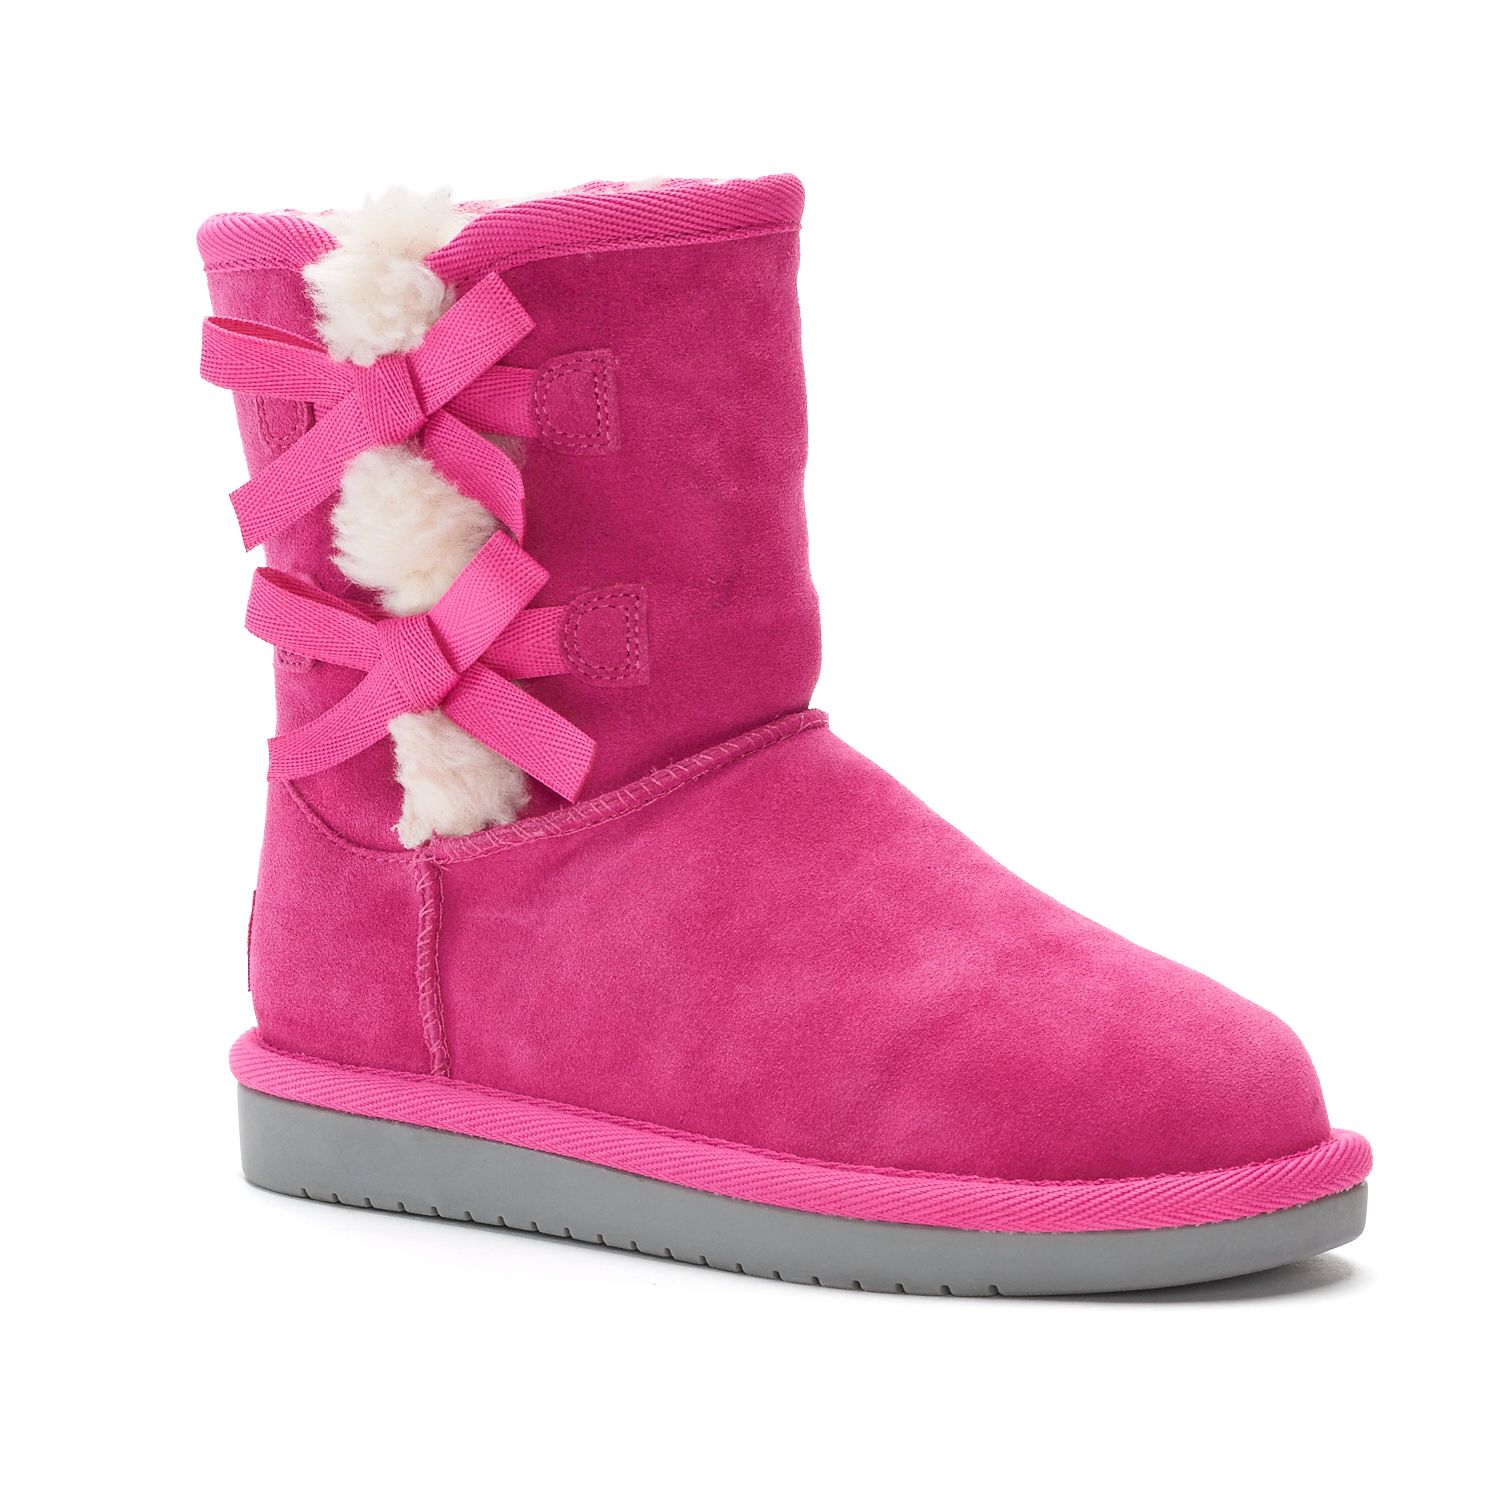 Pink Boots - Shoes | Kohl's